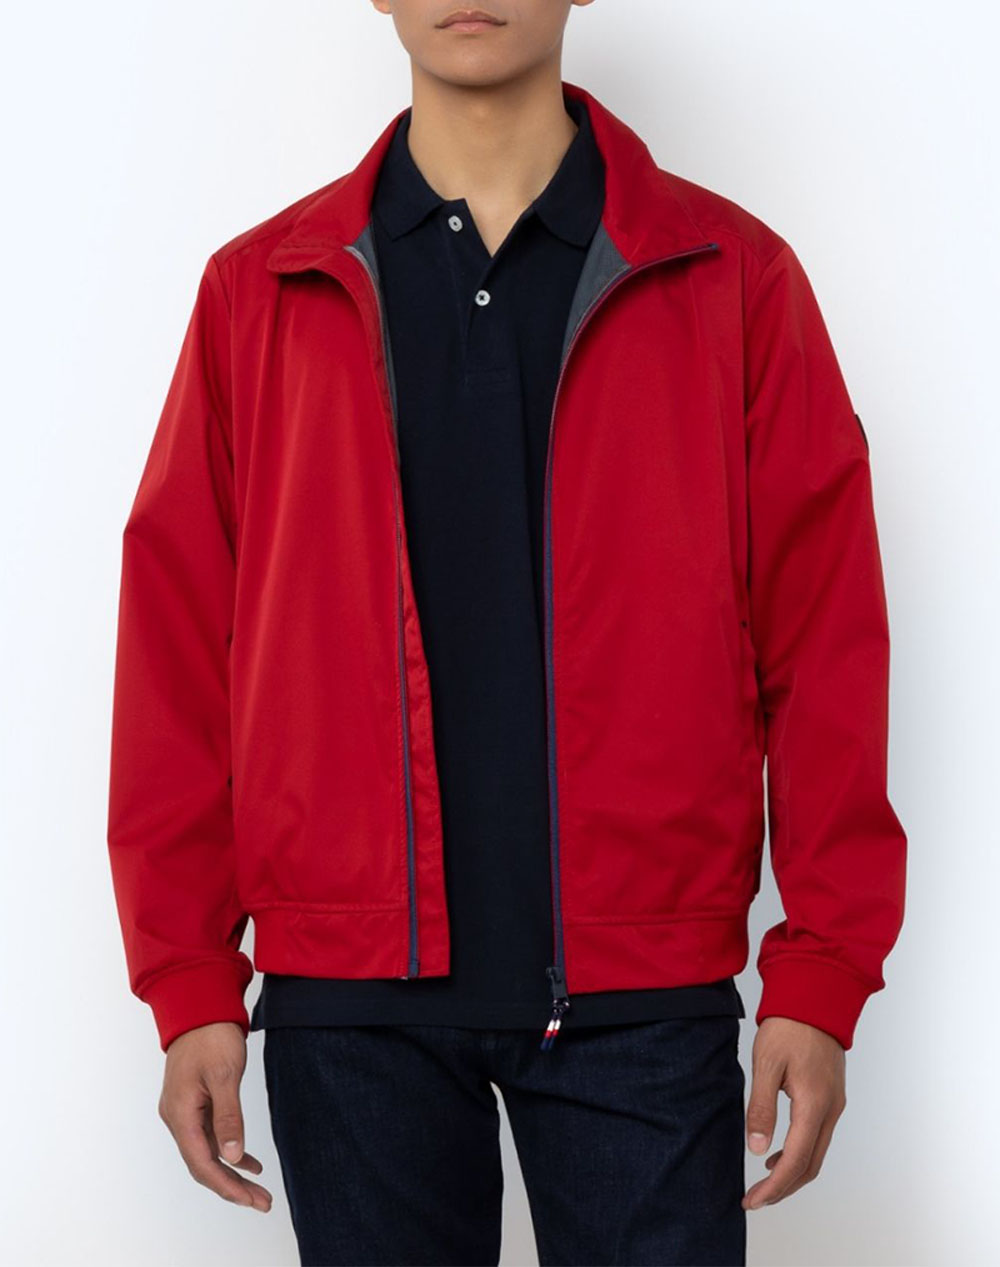 THE BOSTONIANS ΜΠΟΥΦΑΝ BOMBER REGULAR FIT 3W2405T845-Pomegranate Red